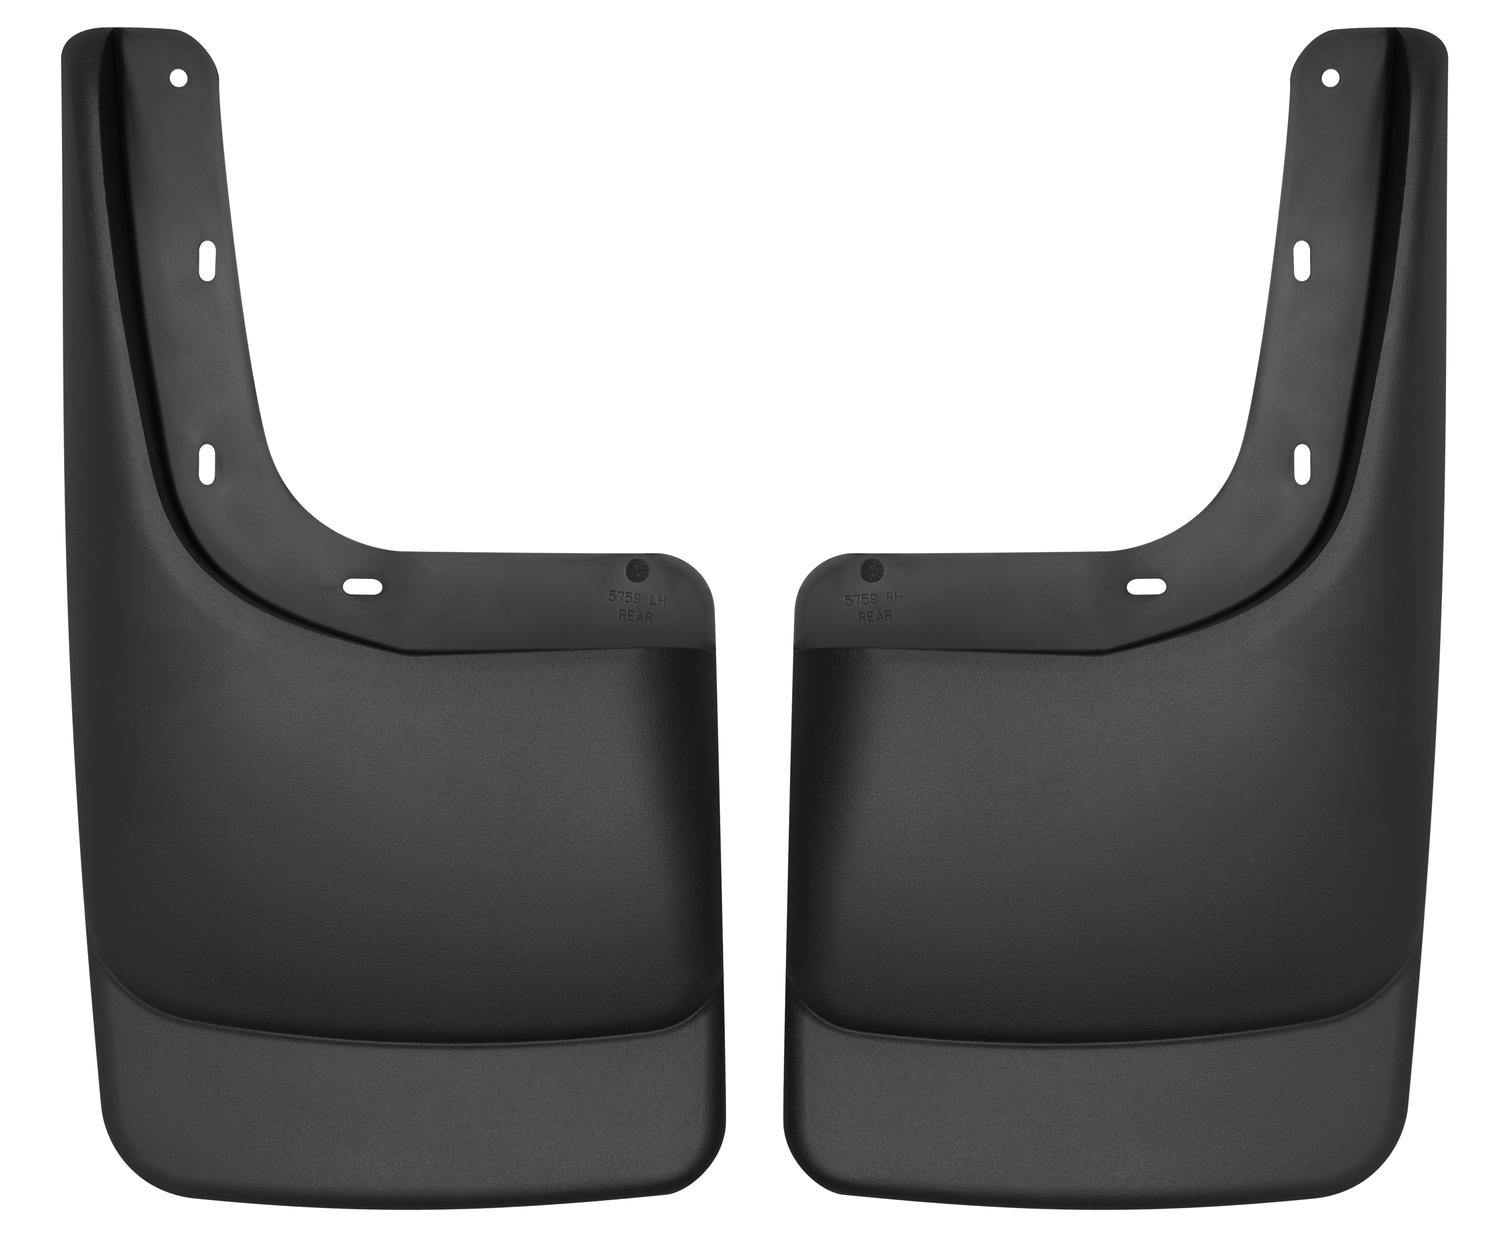 Husky by RealTruck Custom Mud Guards Rear Mud Guards Black Compatible with 04-14 F150; w/ OEM Fender Flares, w/running boards Compatible with select: 2004 ,2005-2009 Ford F150 - image 1 of 3